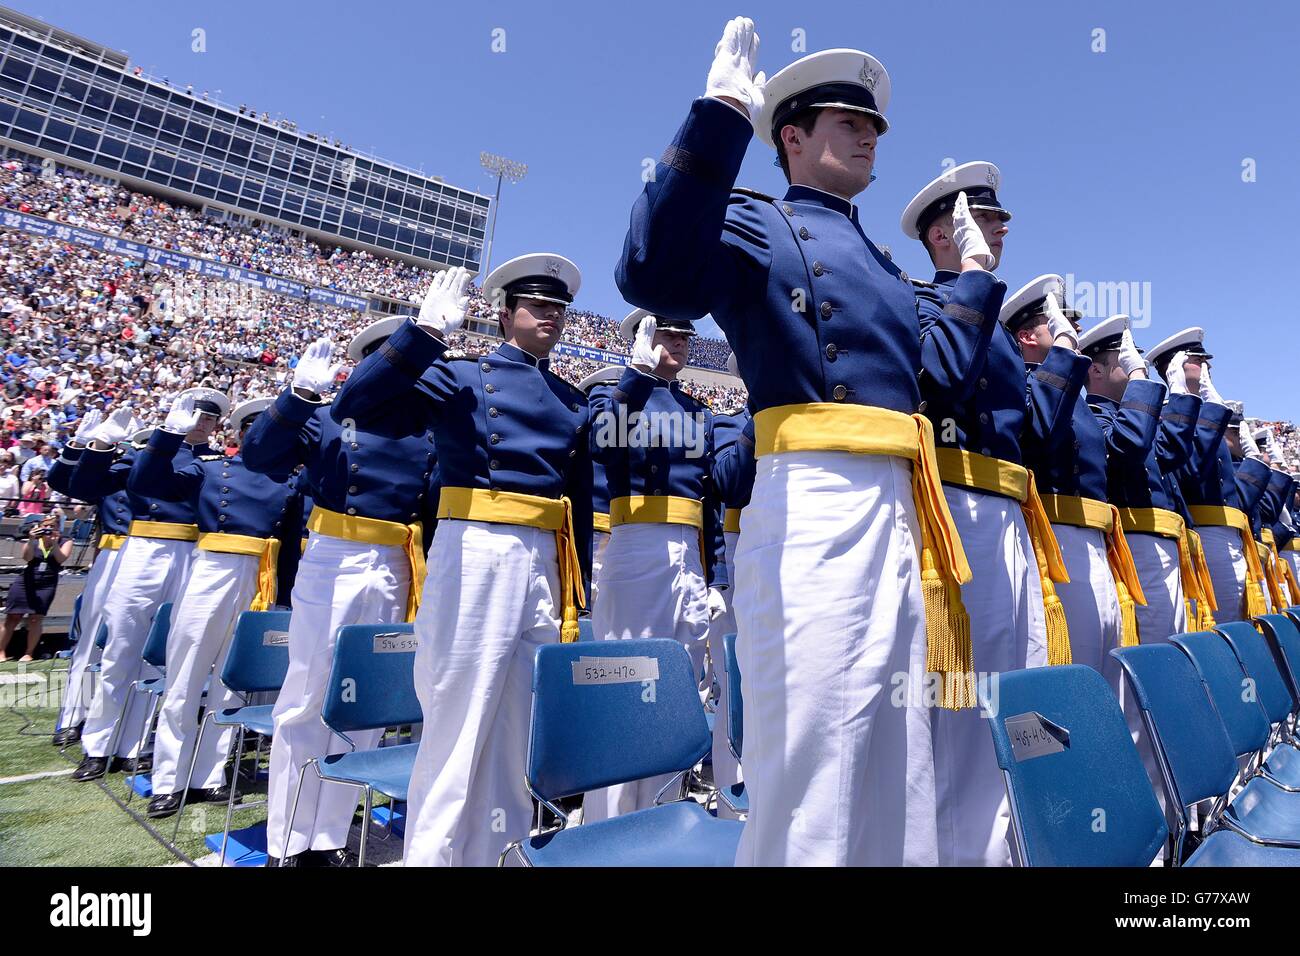 U.S Air Force Academy cadets stand and take the oath as commissioned officers in the Air Force during graduation ceremony at Falcon Stadium June 2, 2016 in Colorado Springs, Colorado. Stock Photo